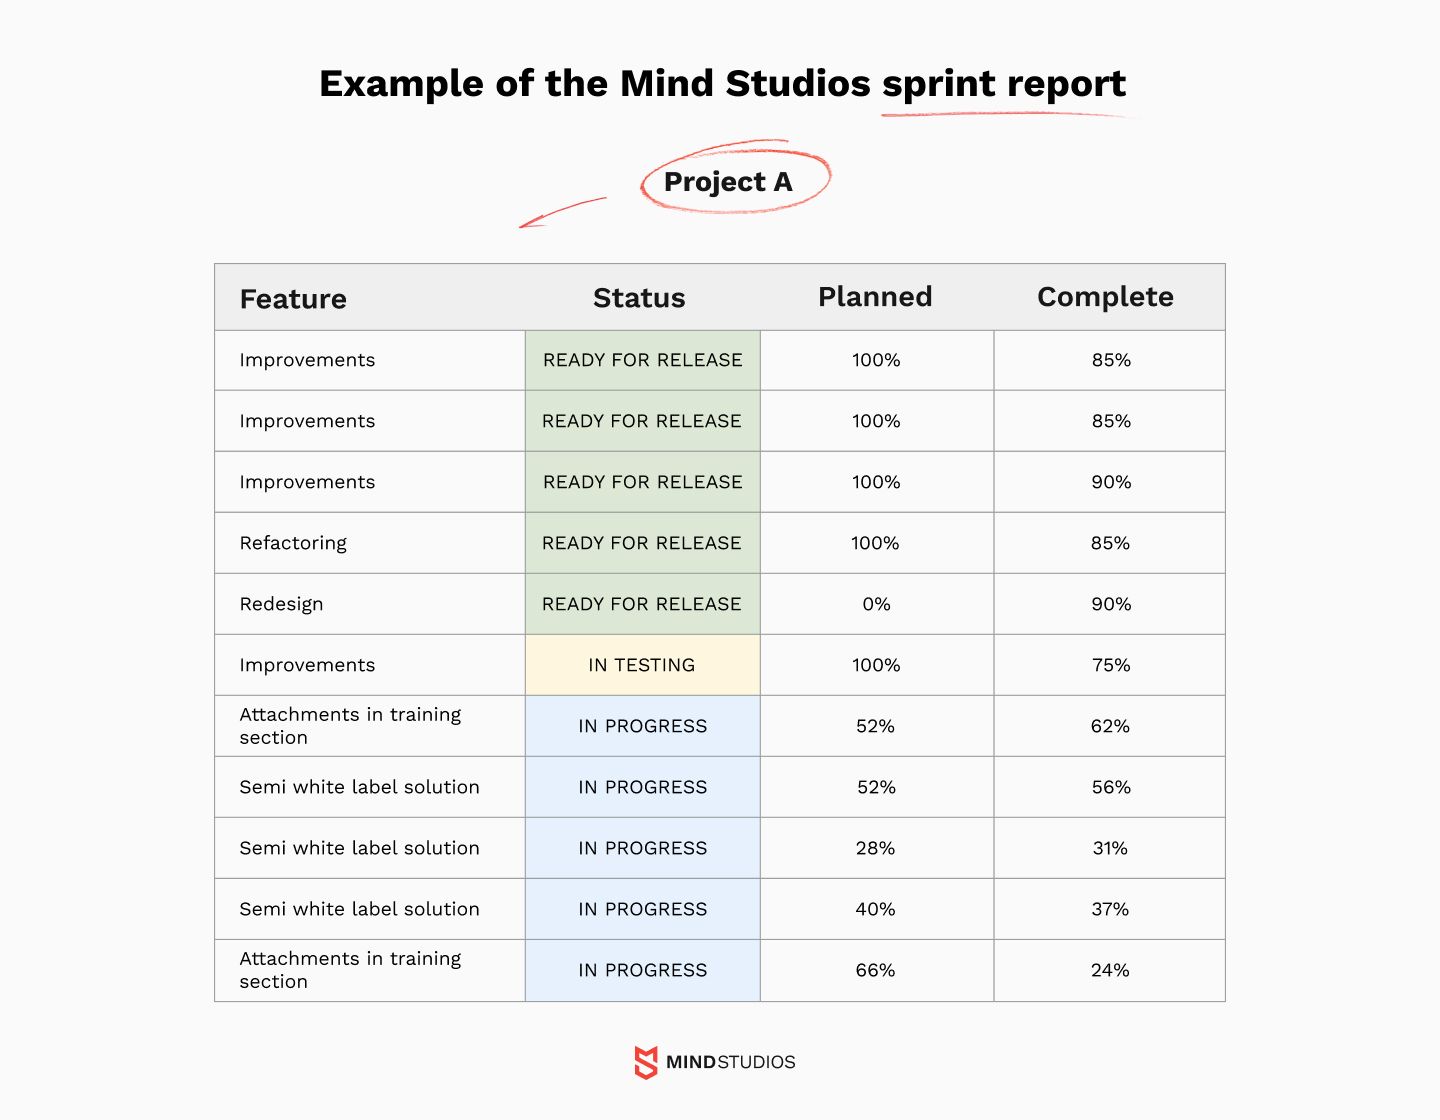 Example of the Mind Studios sprint report